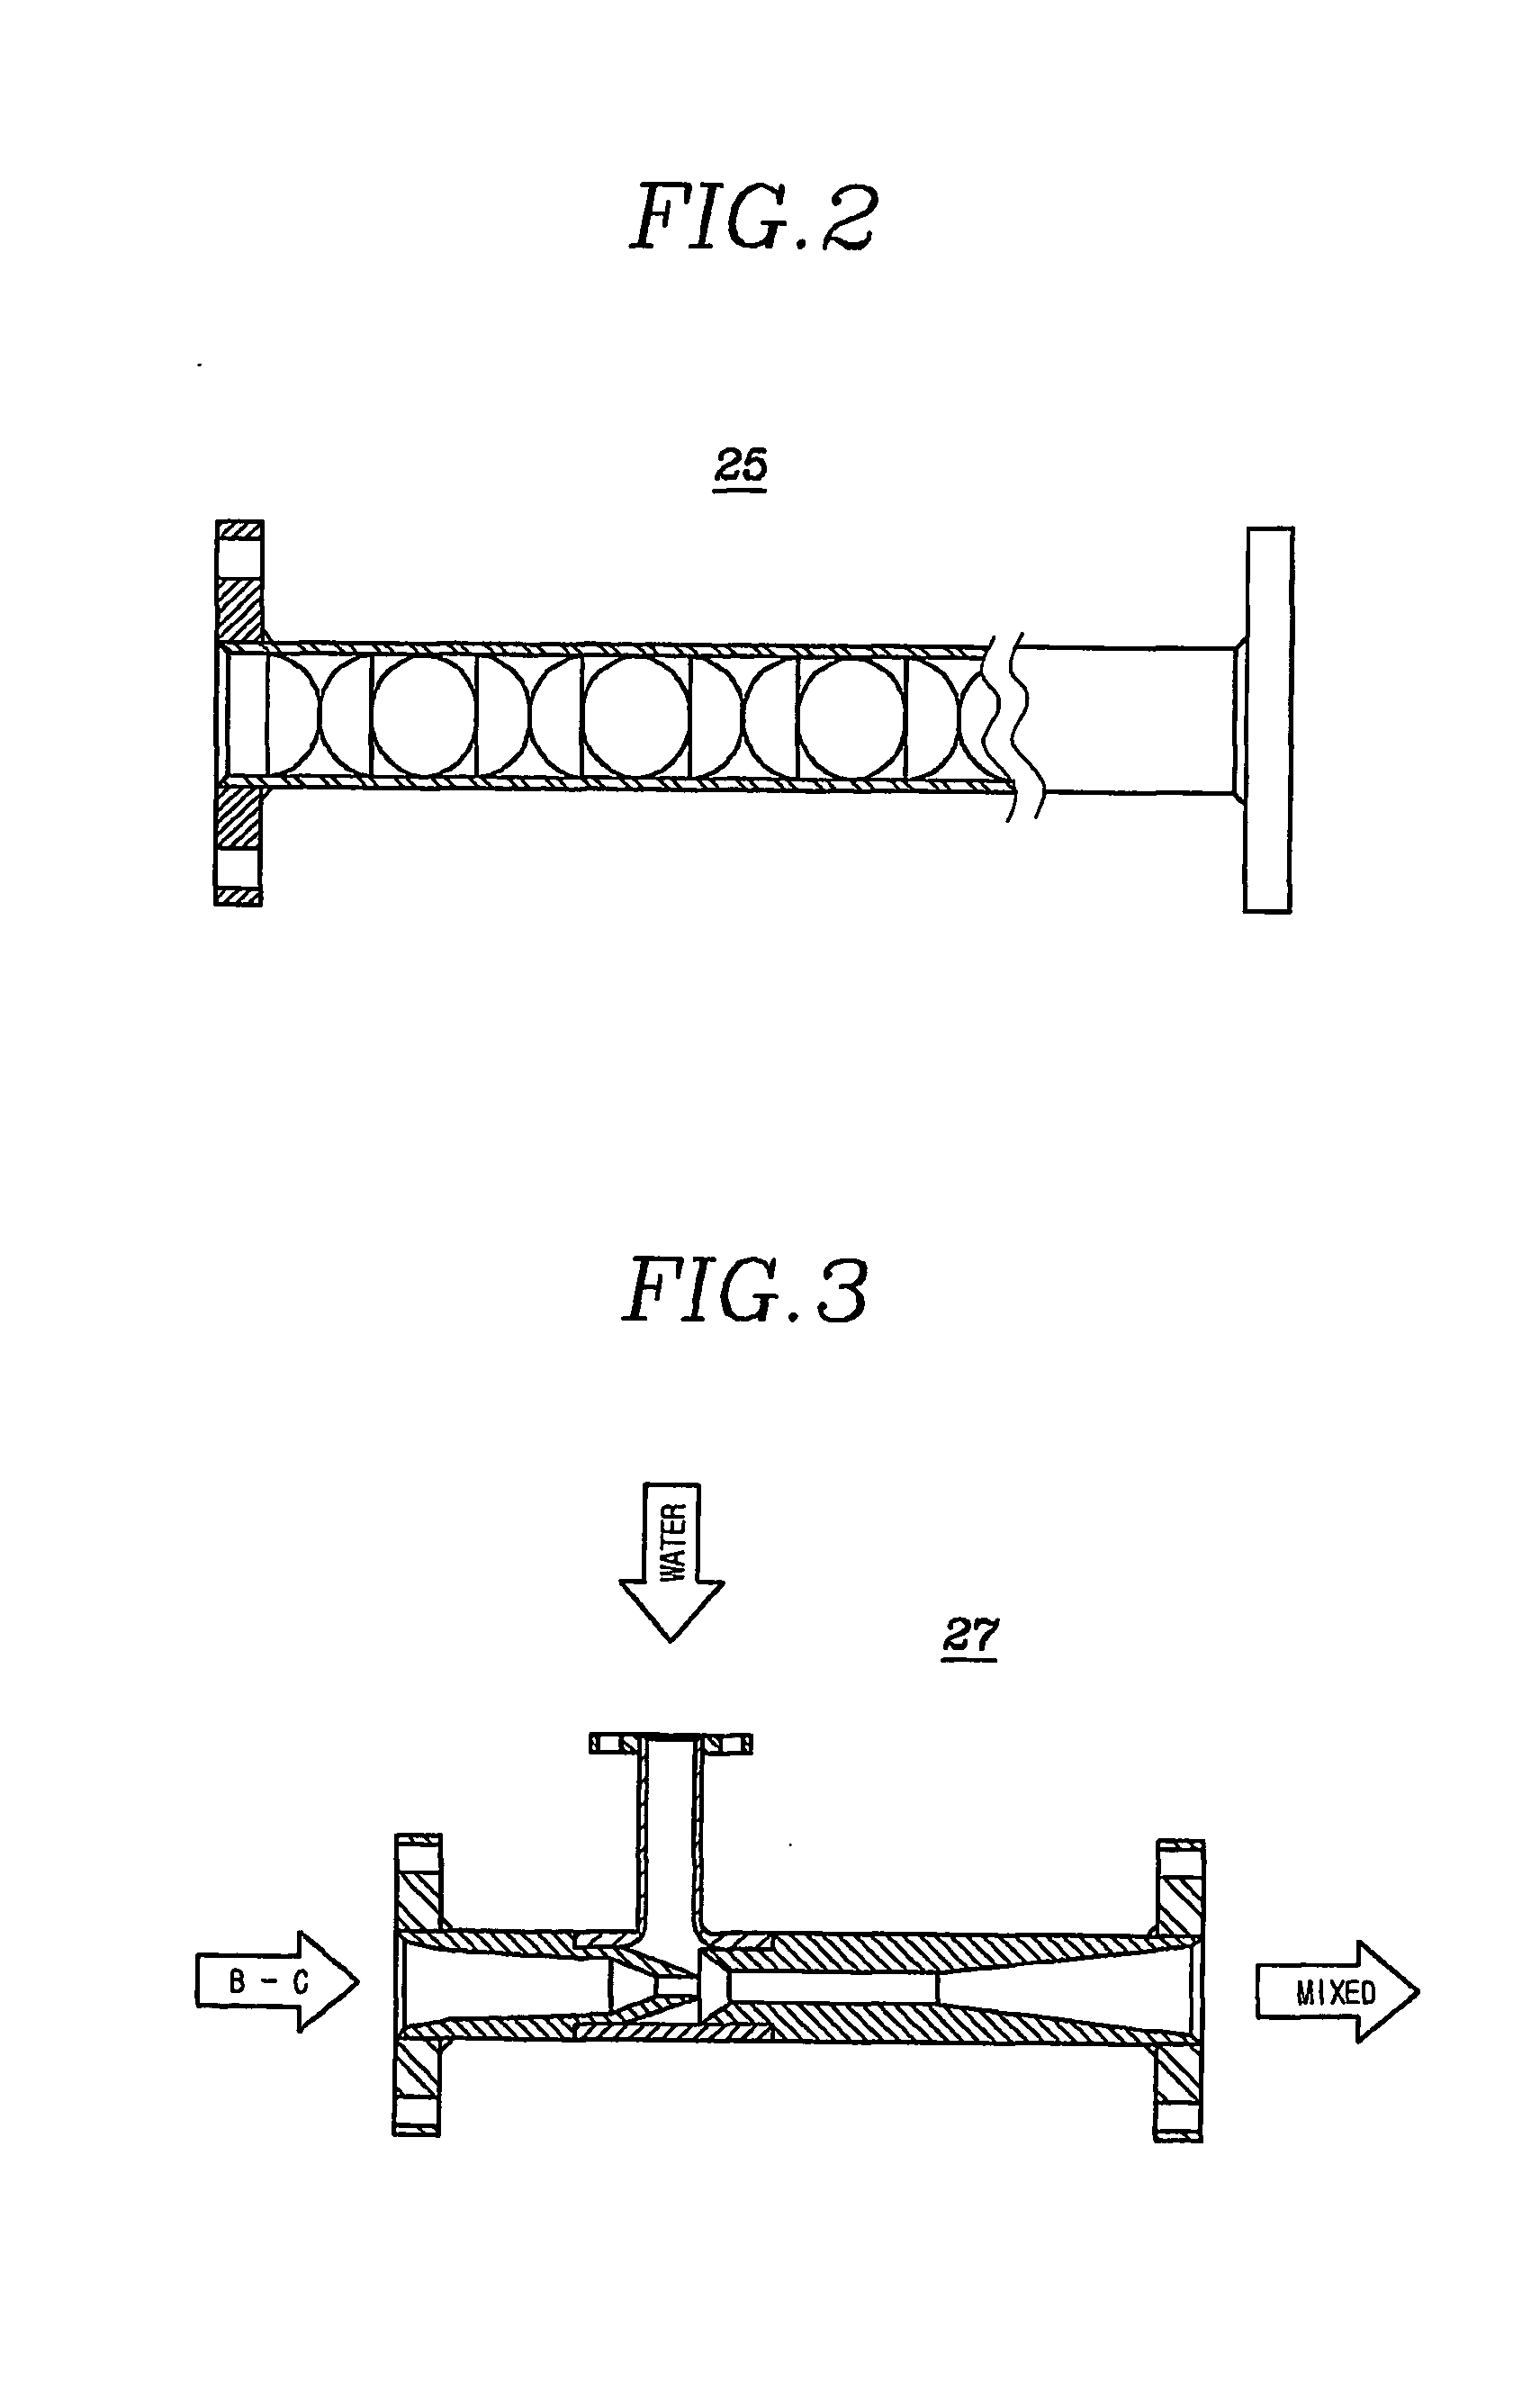 Apparatus for producing water-in-oil emulsifield fuel and supplying the same